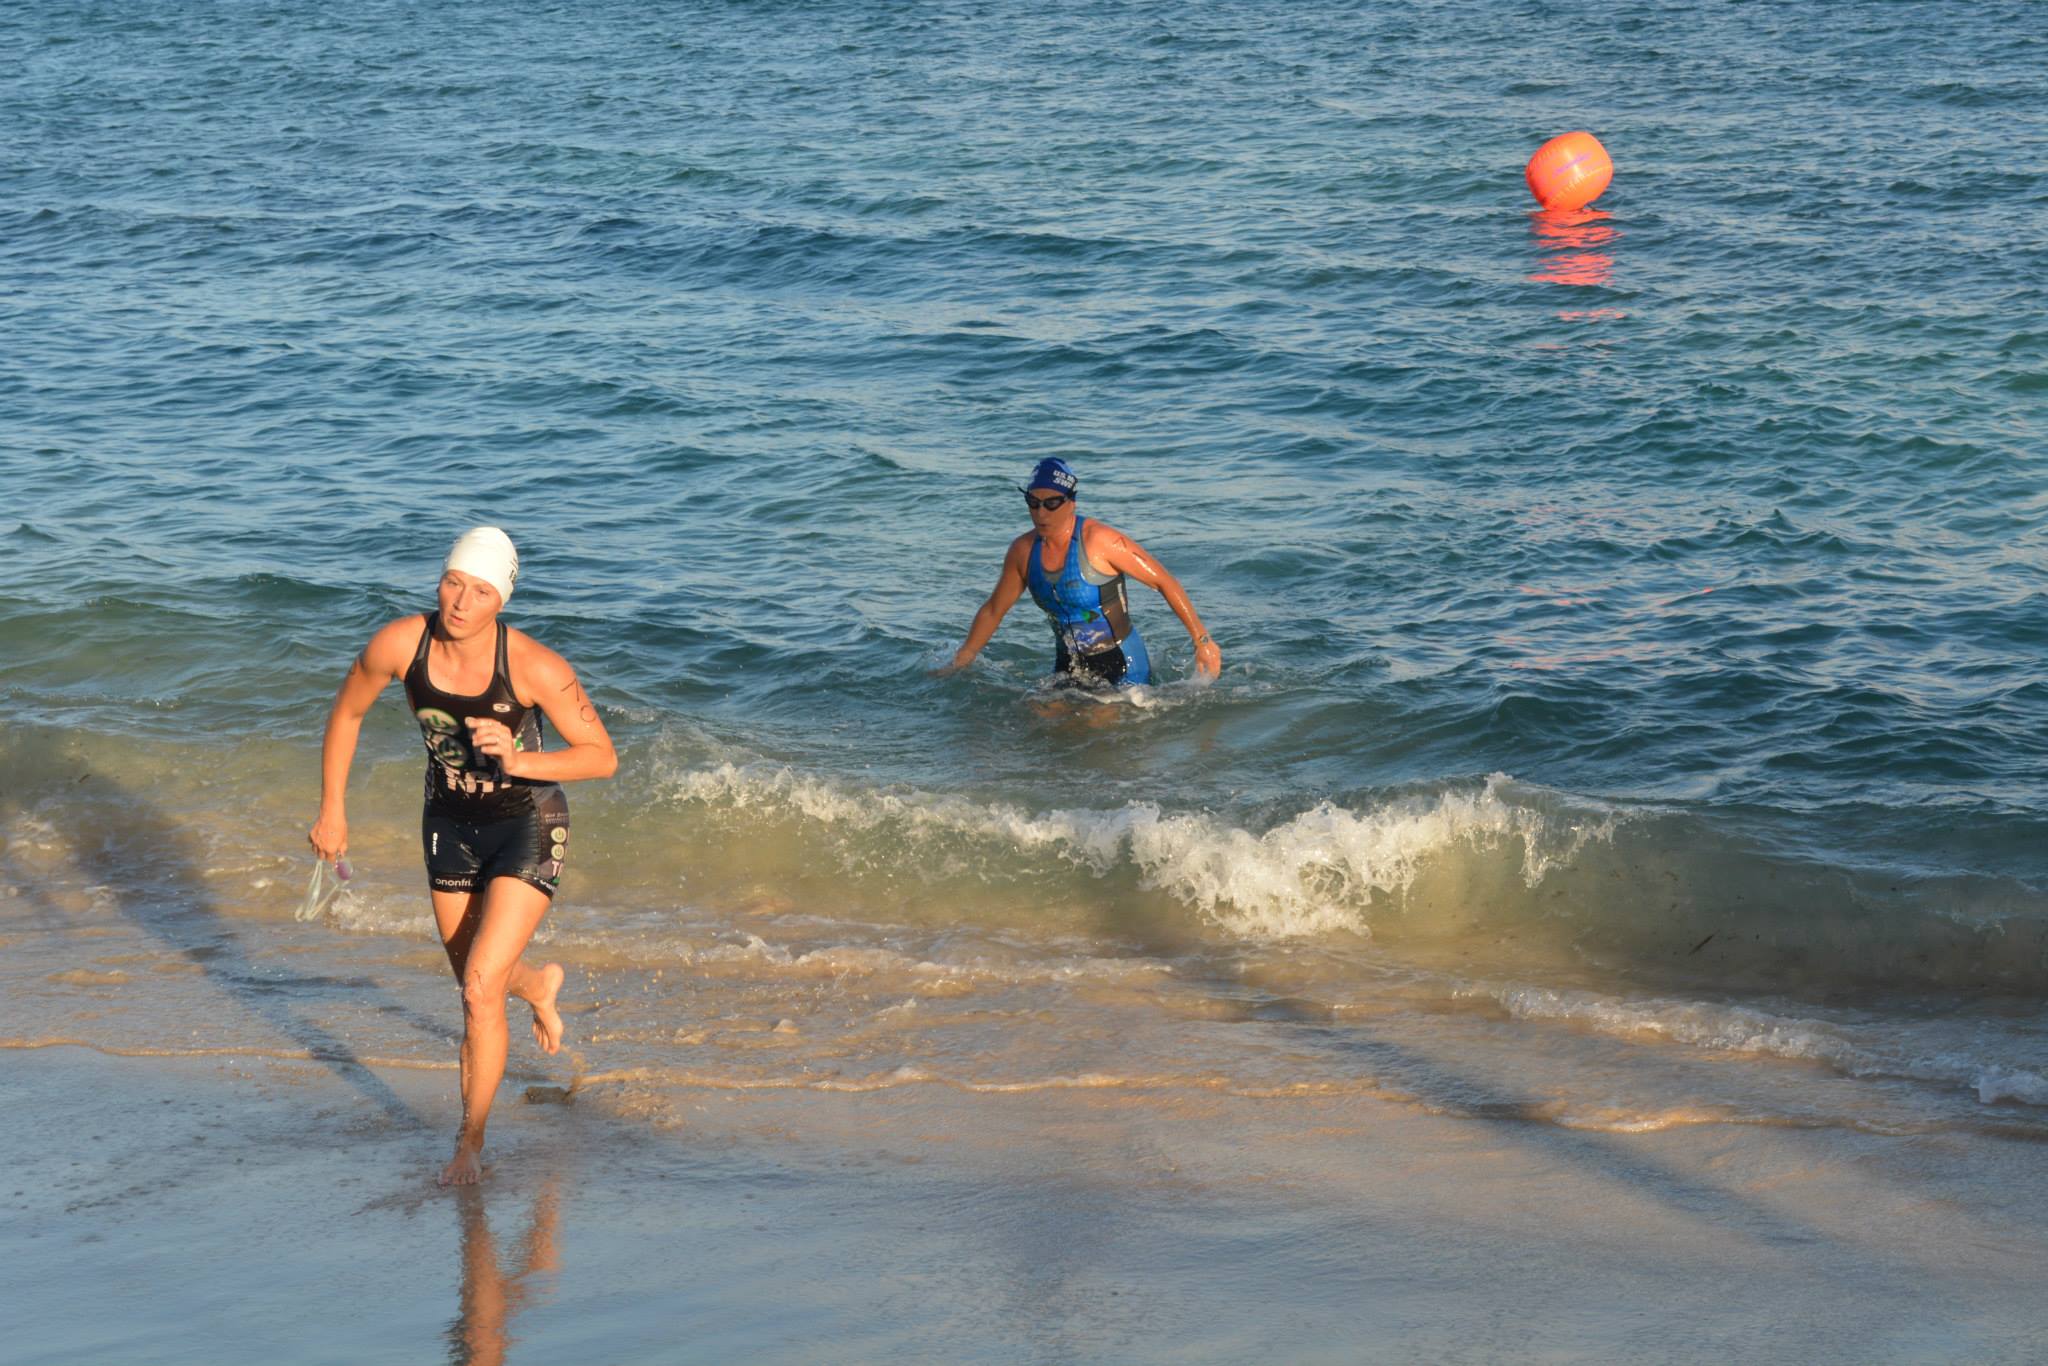 Bridget Klein, followed closely by Esther Ellis, was battling until the final 2 miles of the race.  Bridget was first the female finisher; Esther was second.